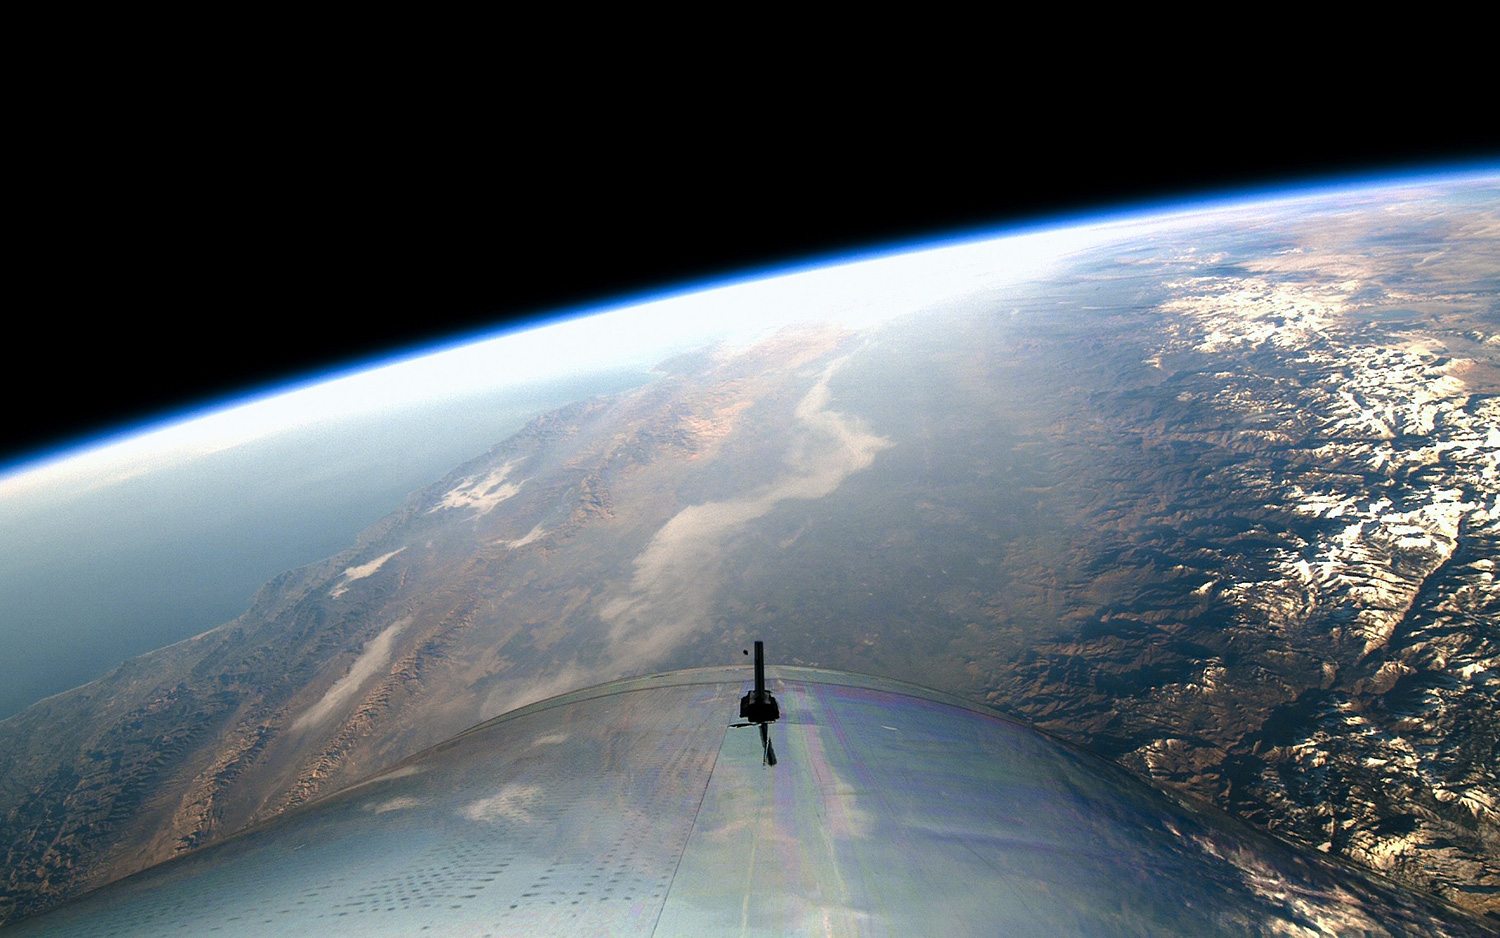 Virgin Galactic focused on Dec. 11 for subsequent SpaceShipTwo spaceflight